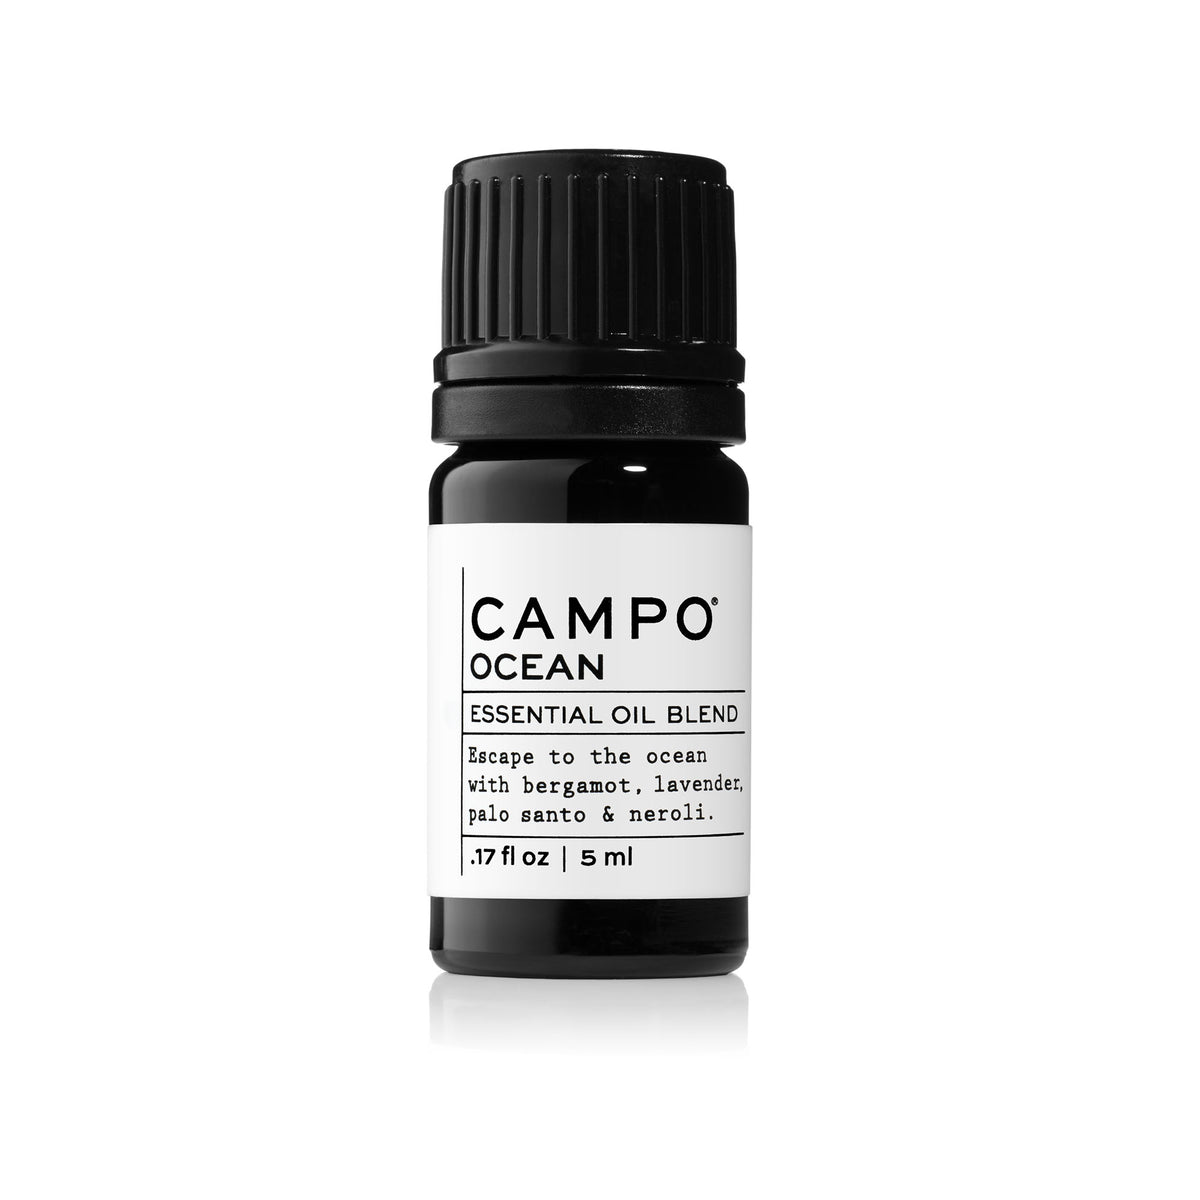 Campo Beauty OCEAN Blend 5 ml Essential Oil. Escape to the ocean with this 100% pure essential oil blend of neroli, palo santo, lavender and bergamot.